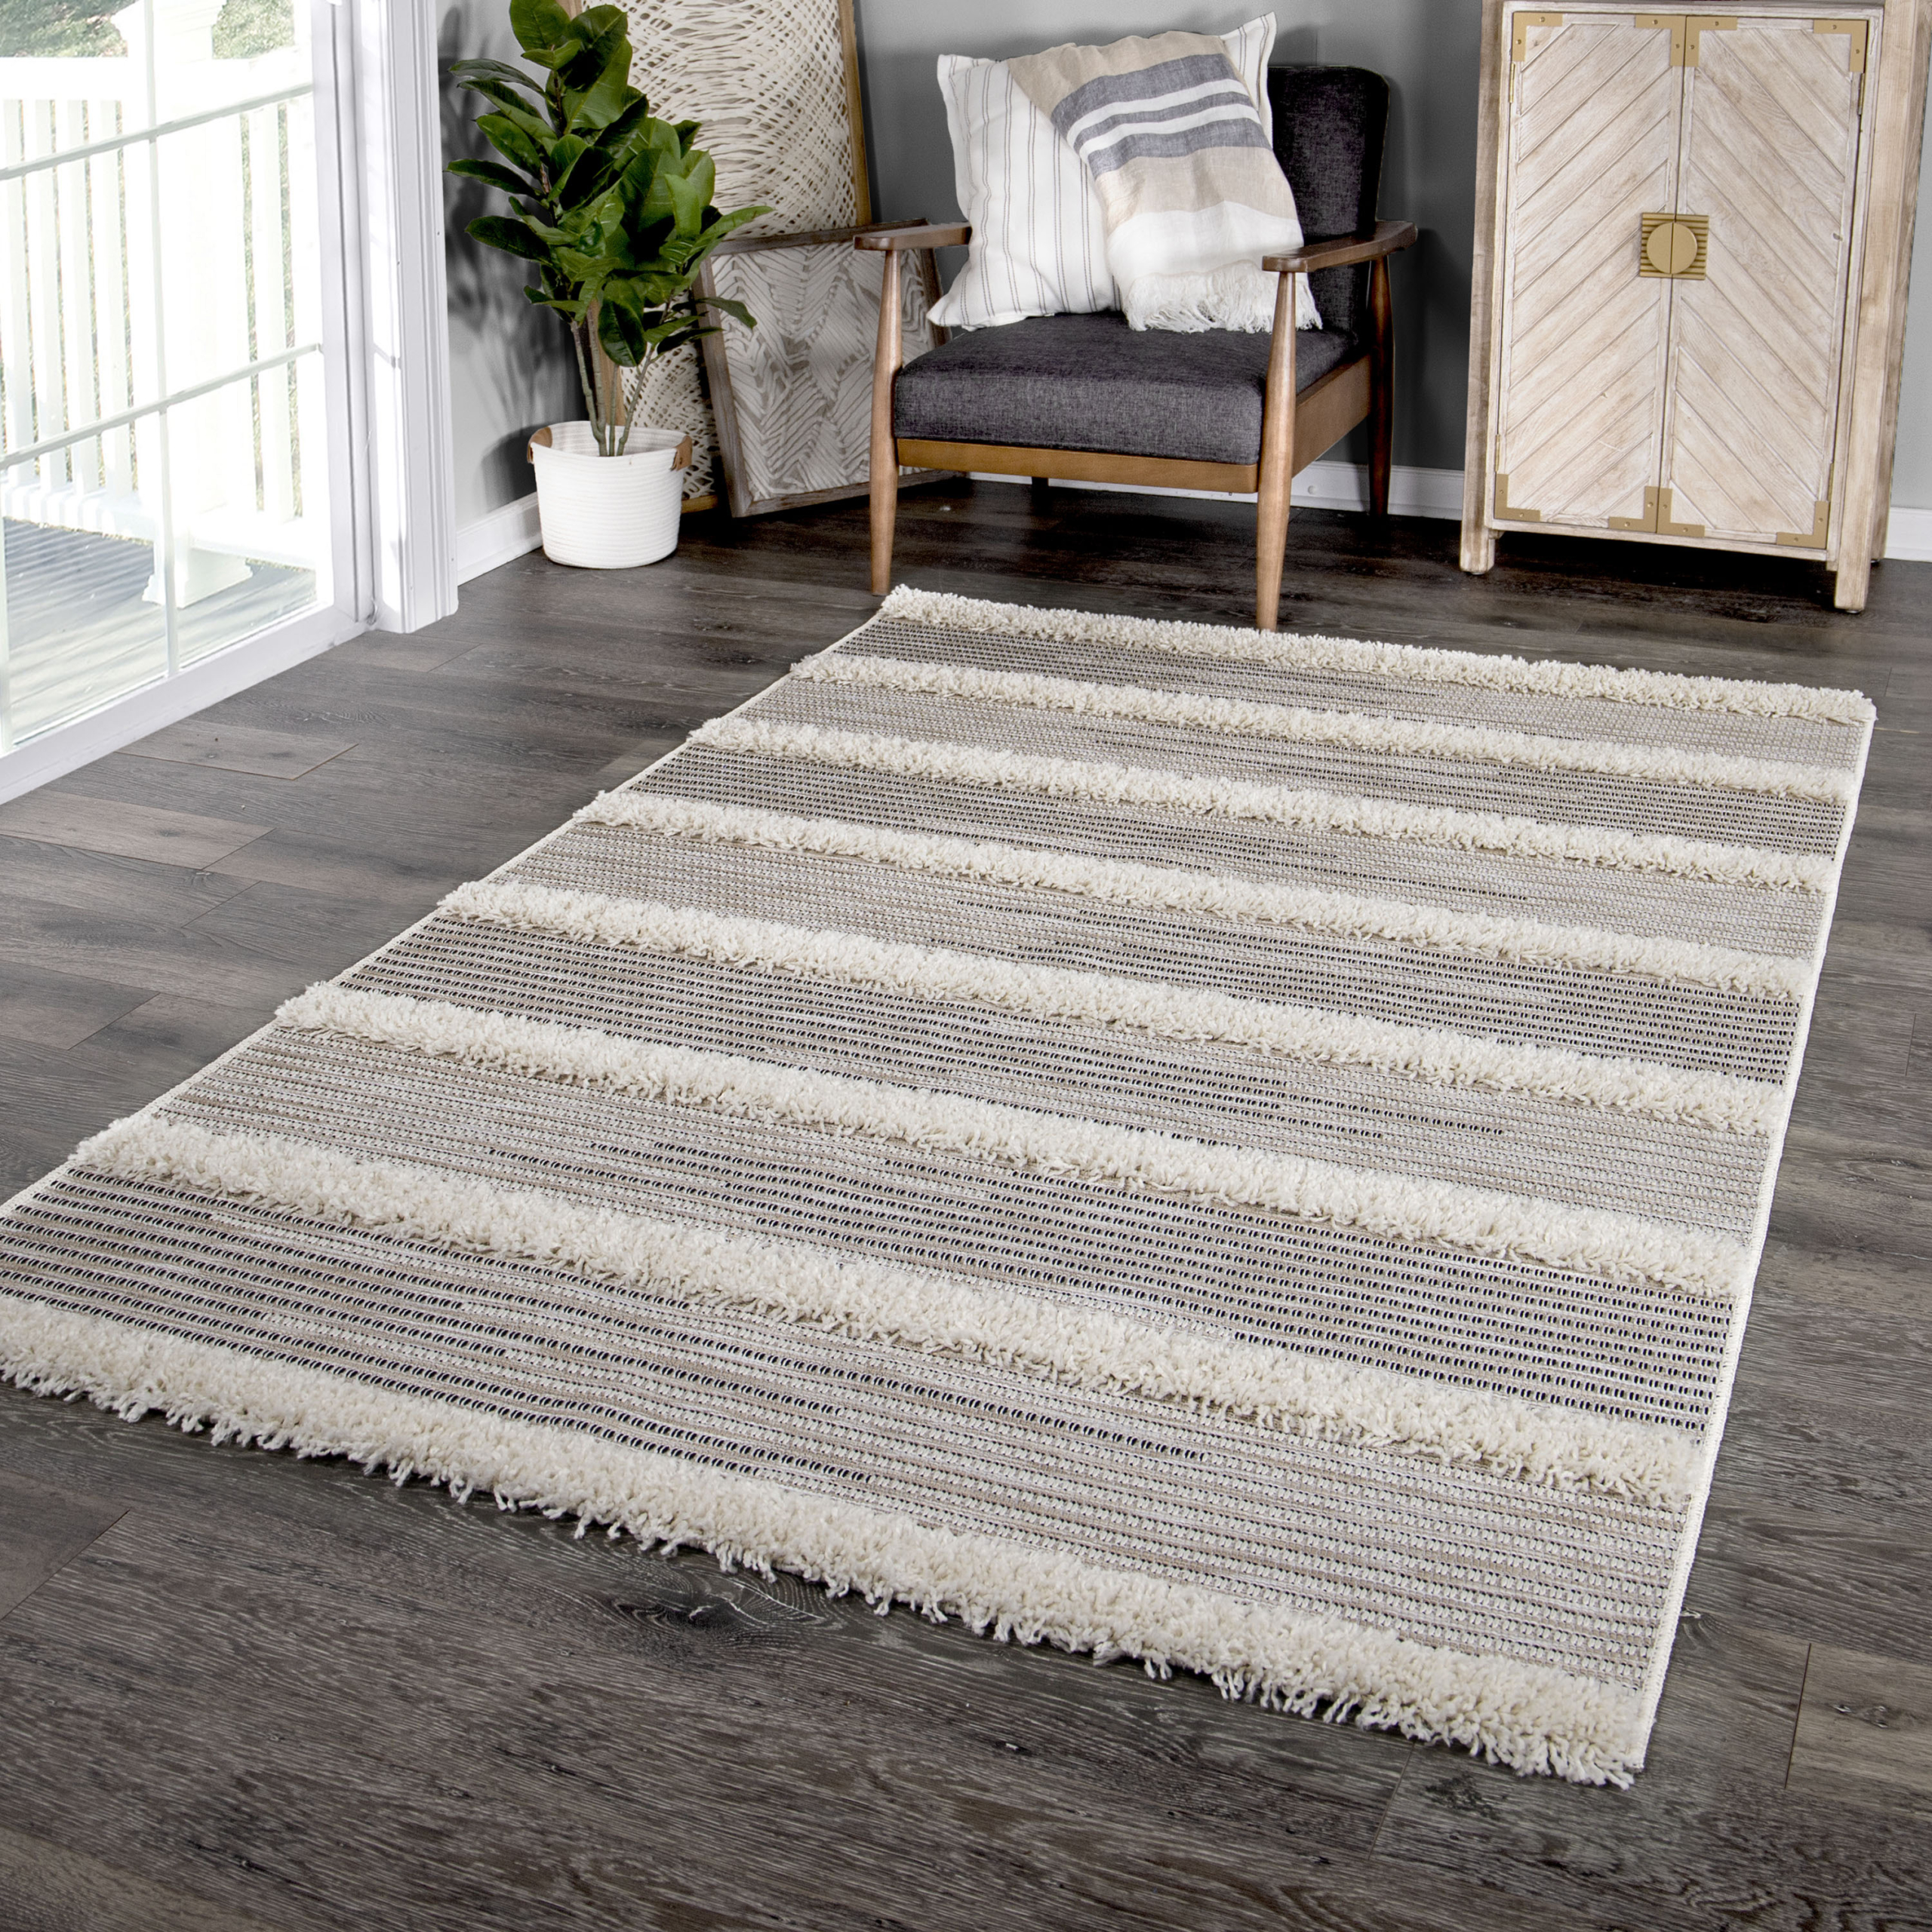 Clearance Rugs On Walmart Com Pay As Low As 17 The Krazy